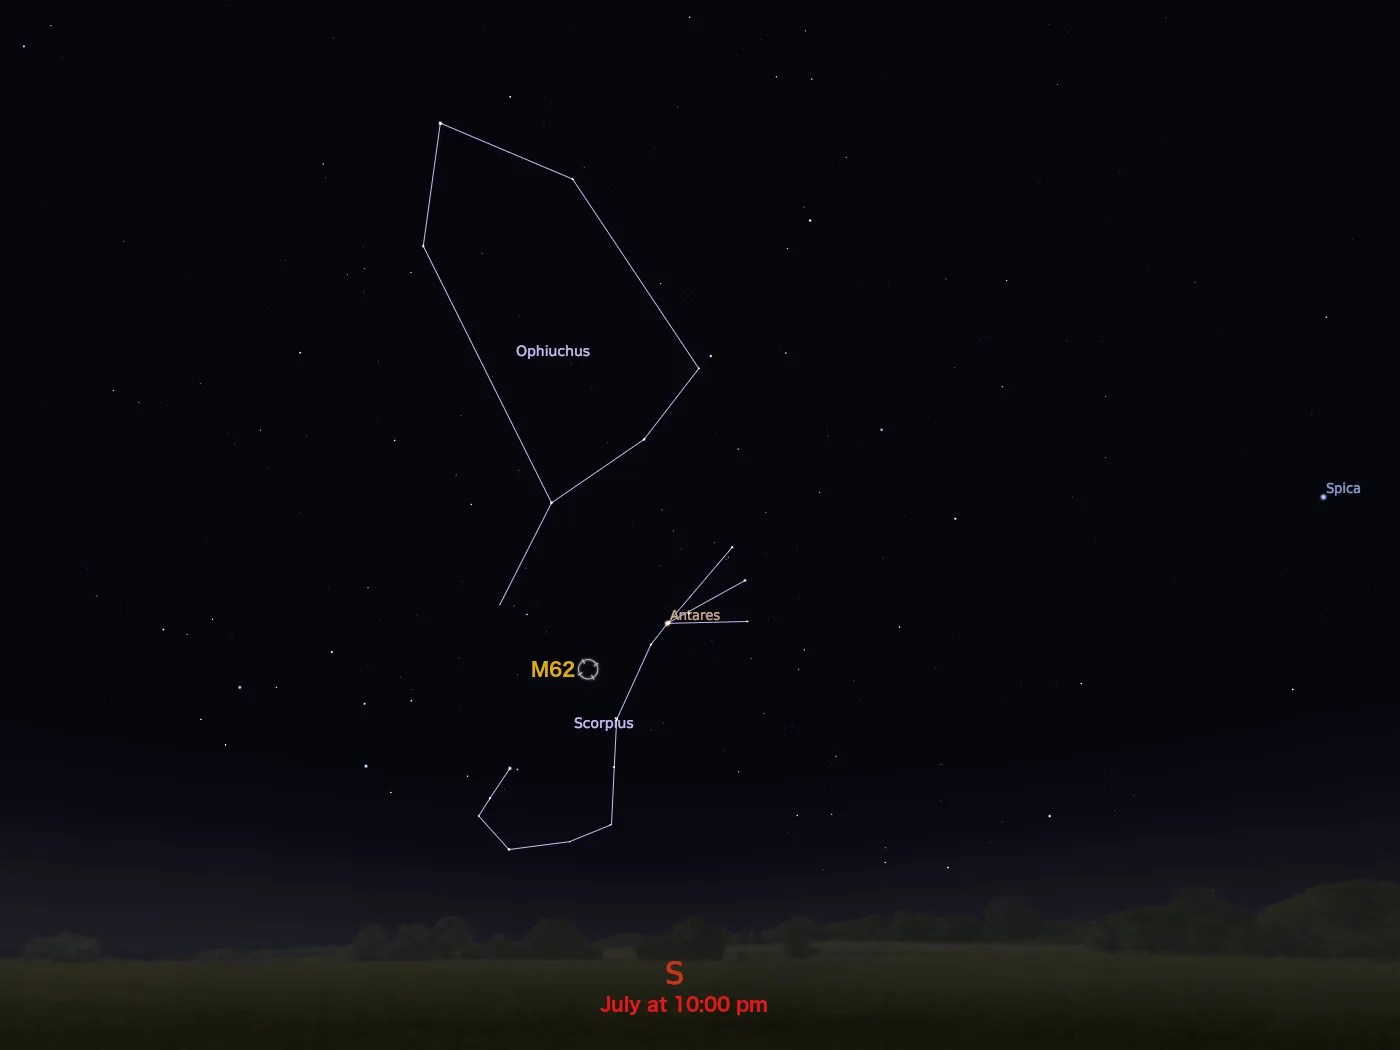 star chart showing location in night sky of M62